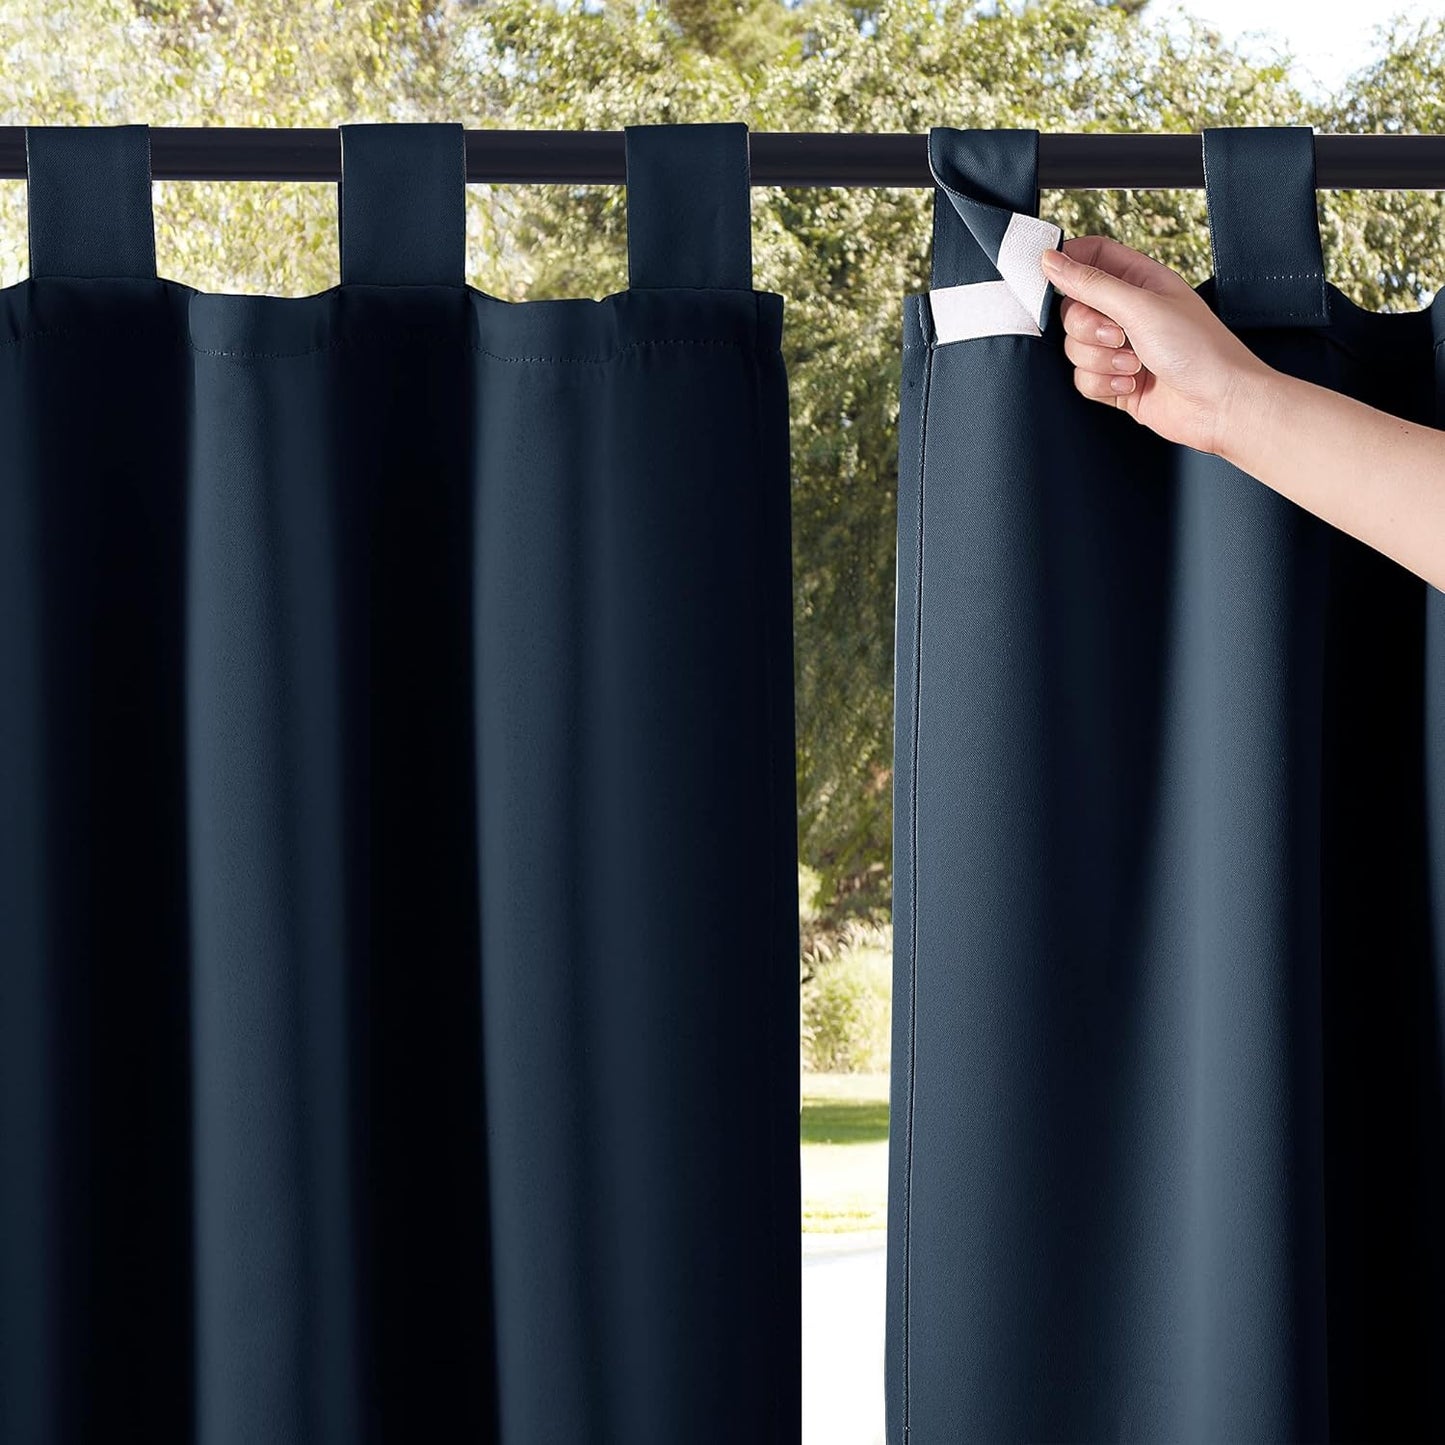 NICETOWN 2 Panels Outdoor Patio Curtainss Waterproof Room Darkening Drapes, Detachable Sticky Tab Top Thermal Insulated Privacy Outdoor Dividers for Porch/Doorway, Biscotti Beige, W52 X L84  NICETOWN Navy Blue W84 X L95 